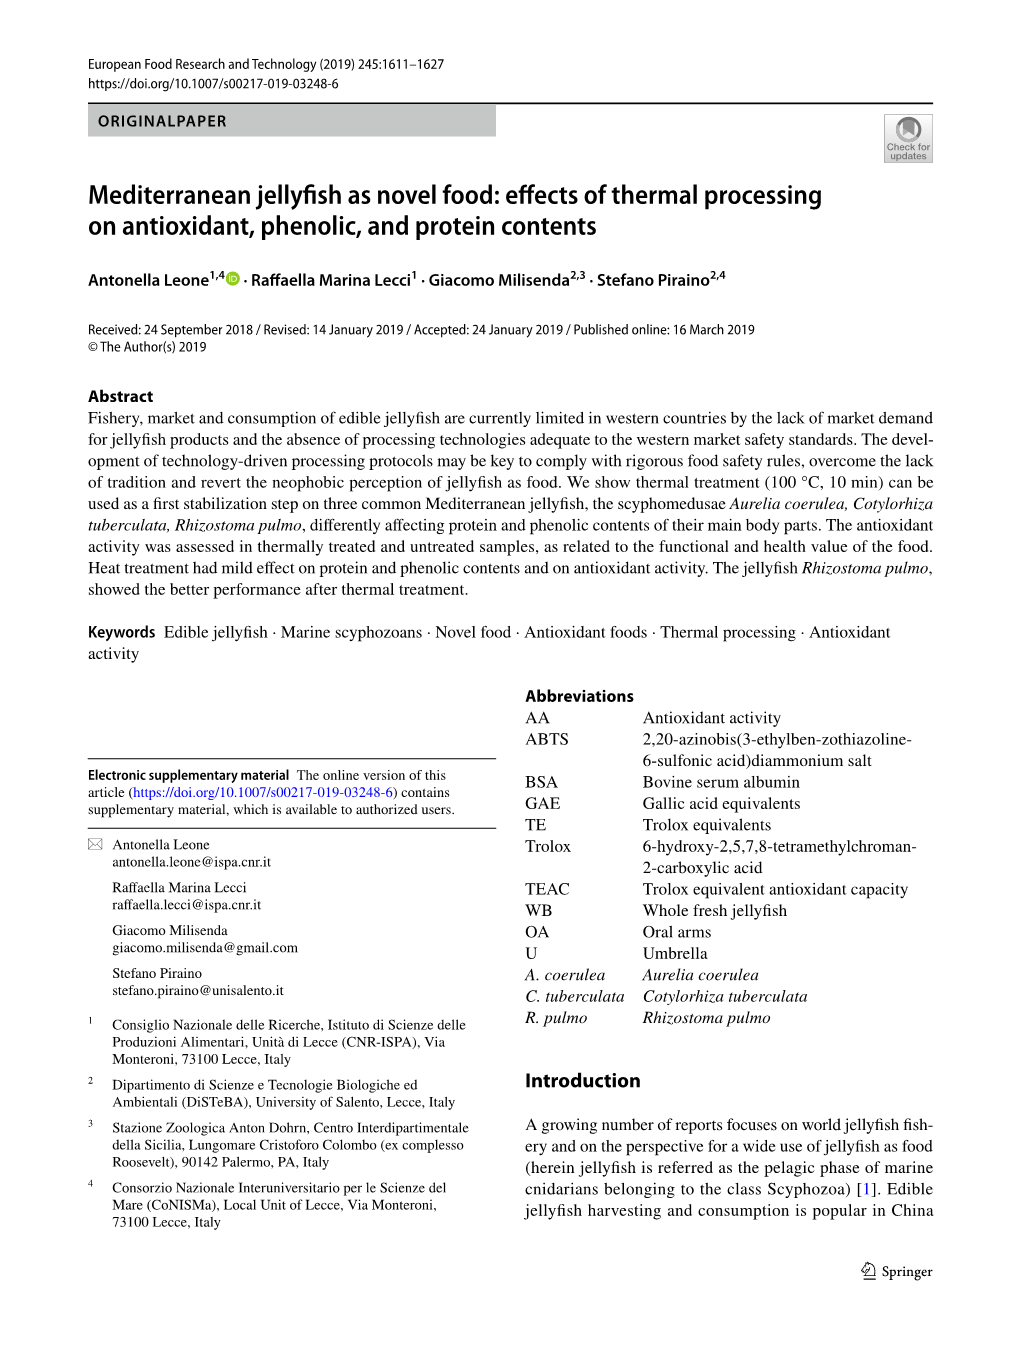 Mediterranean Jellyfish As Novel Food: Effects of Thermal Processing on Antioxidant, Phenolic, and Protein Contents